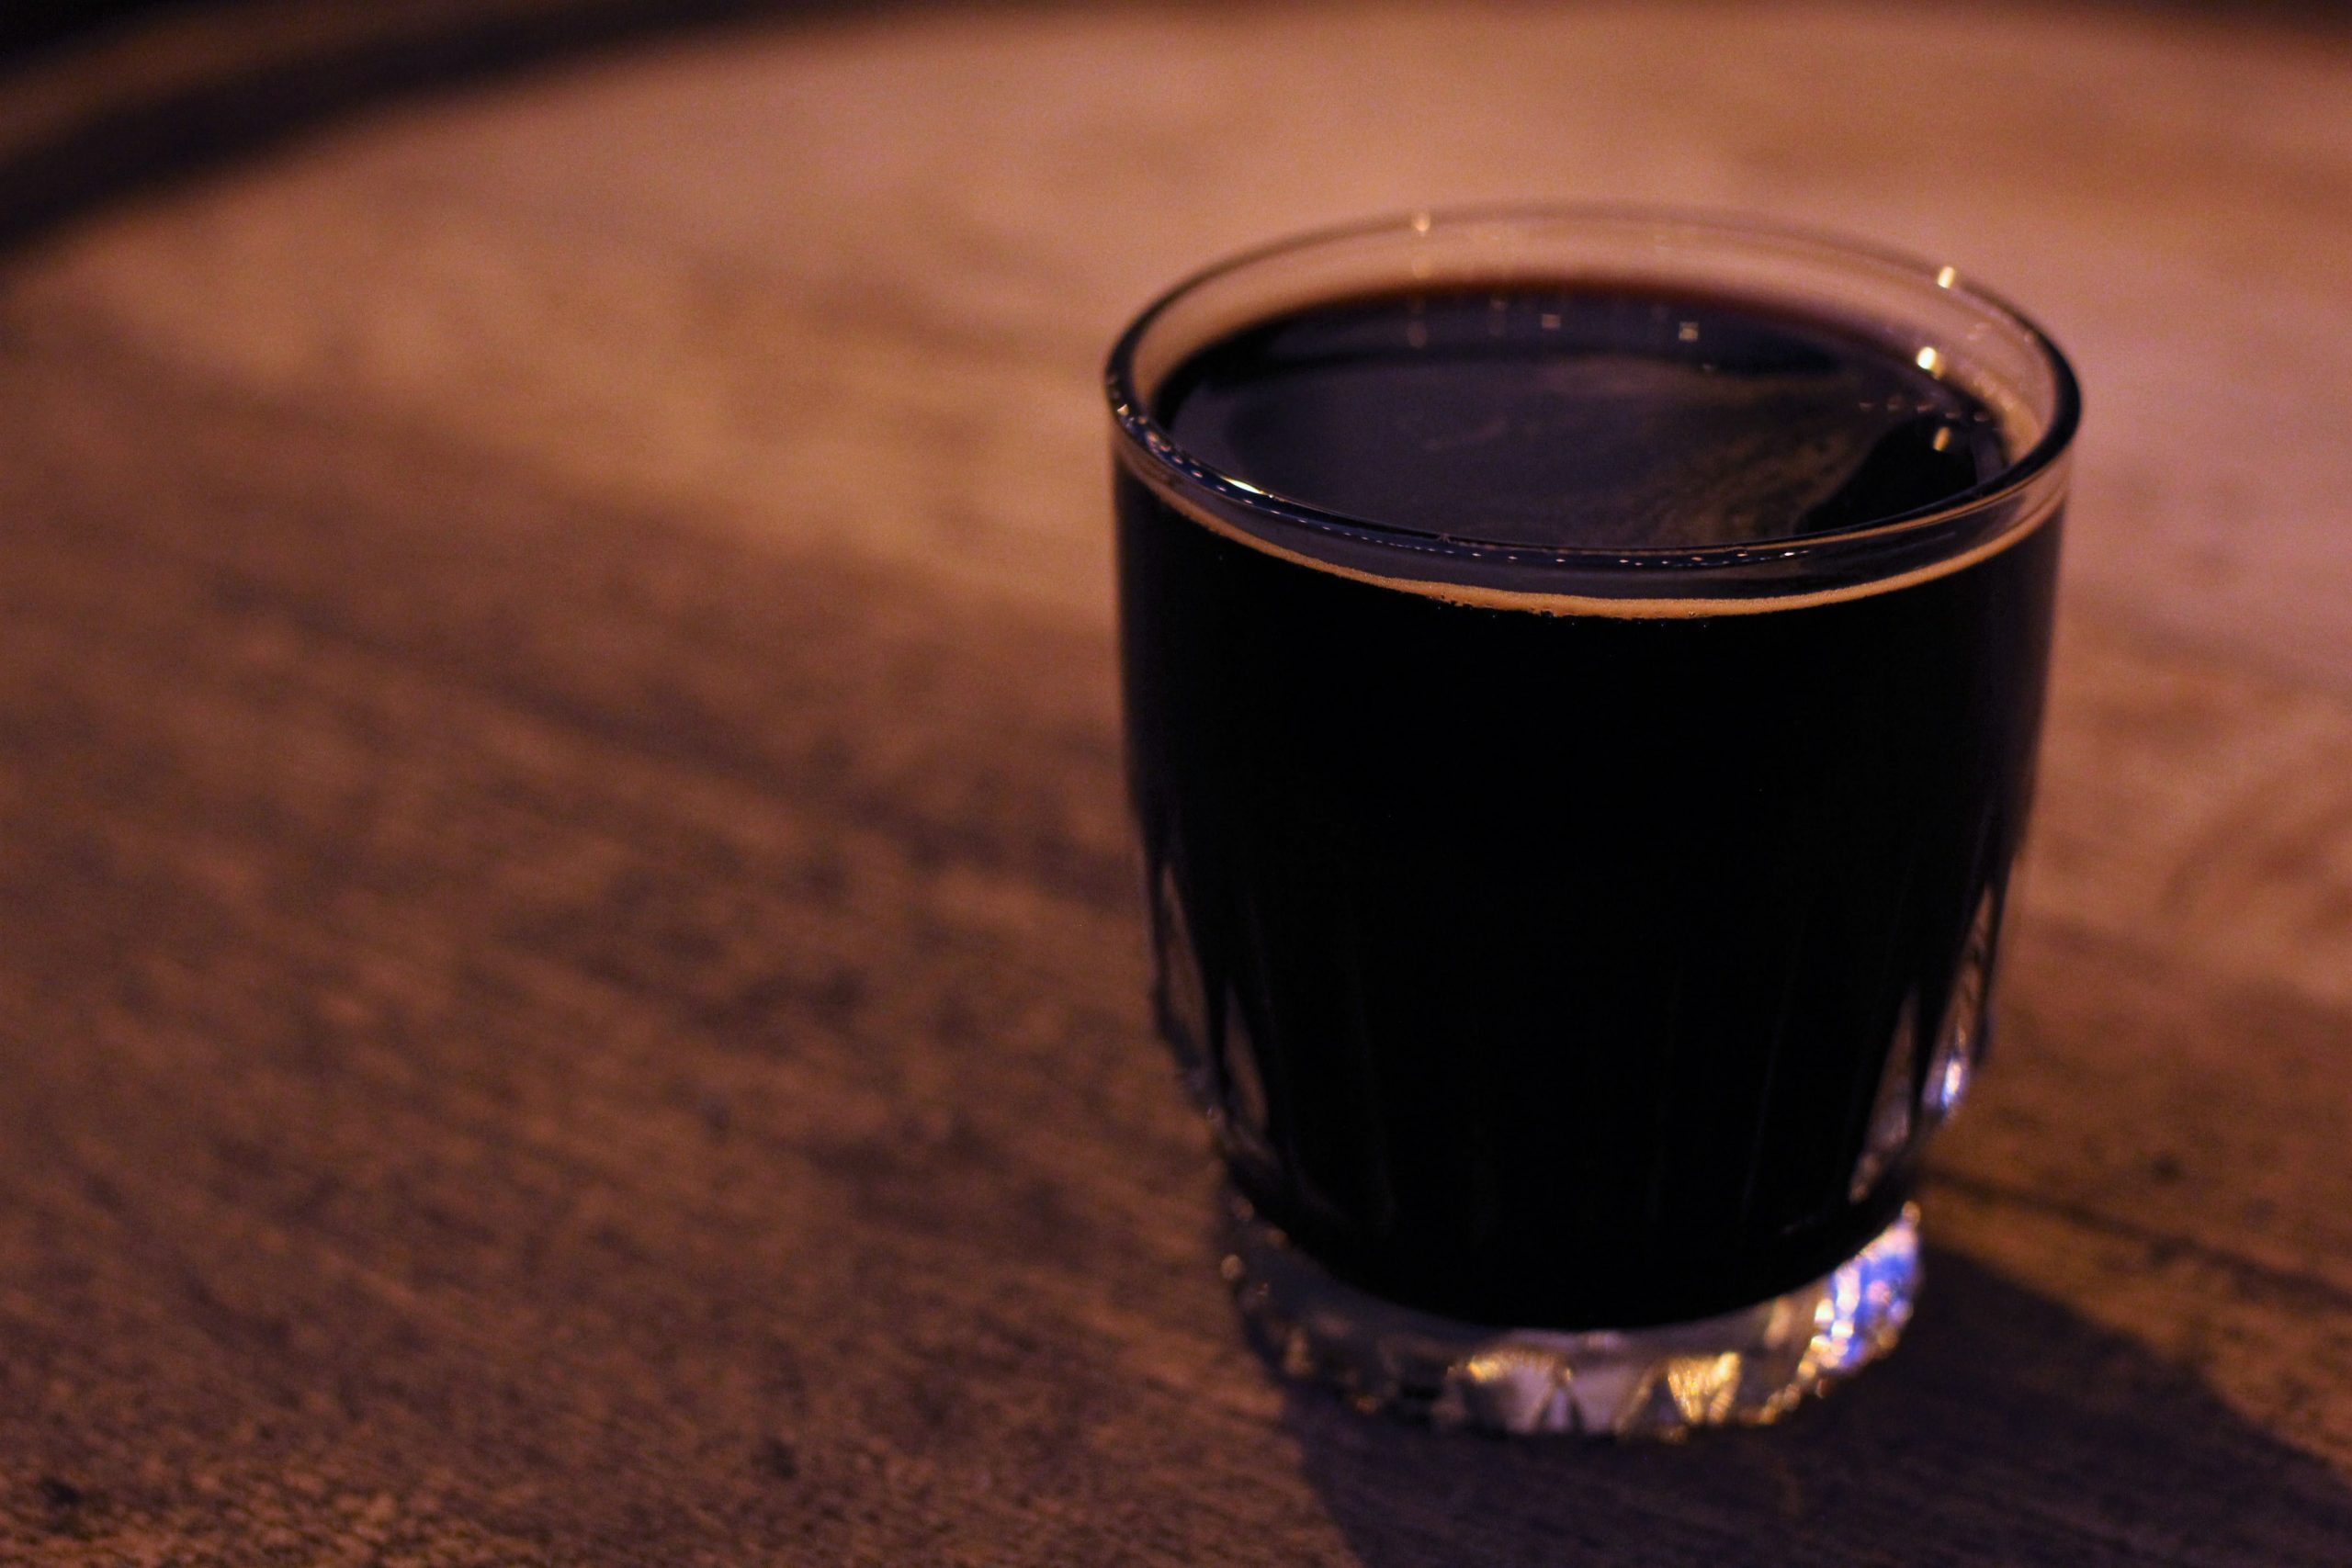 A moody photo of a dark beer in an old fashioned glass on a wood tabletop.